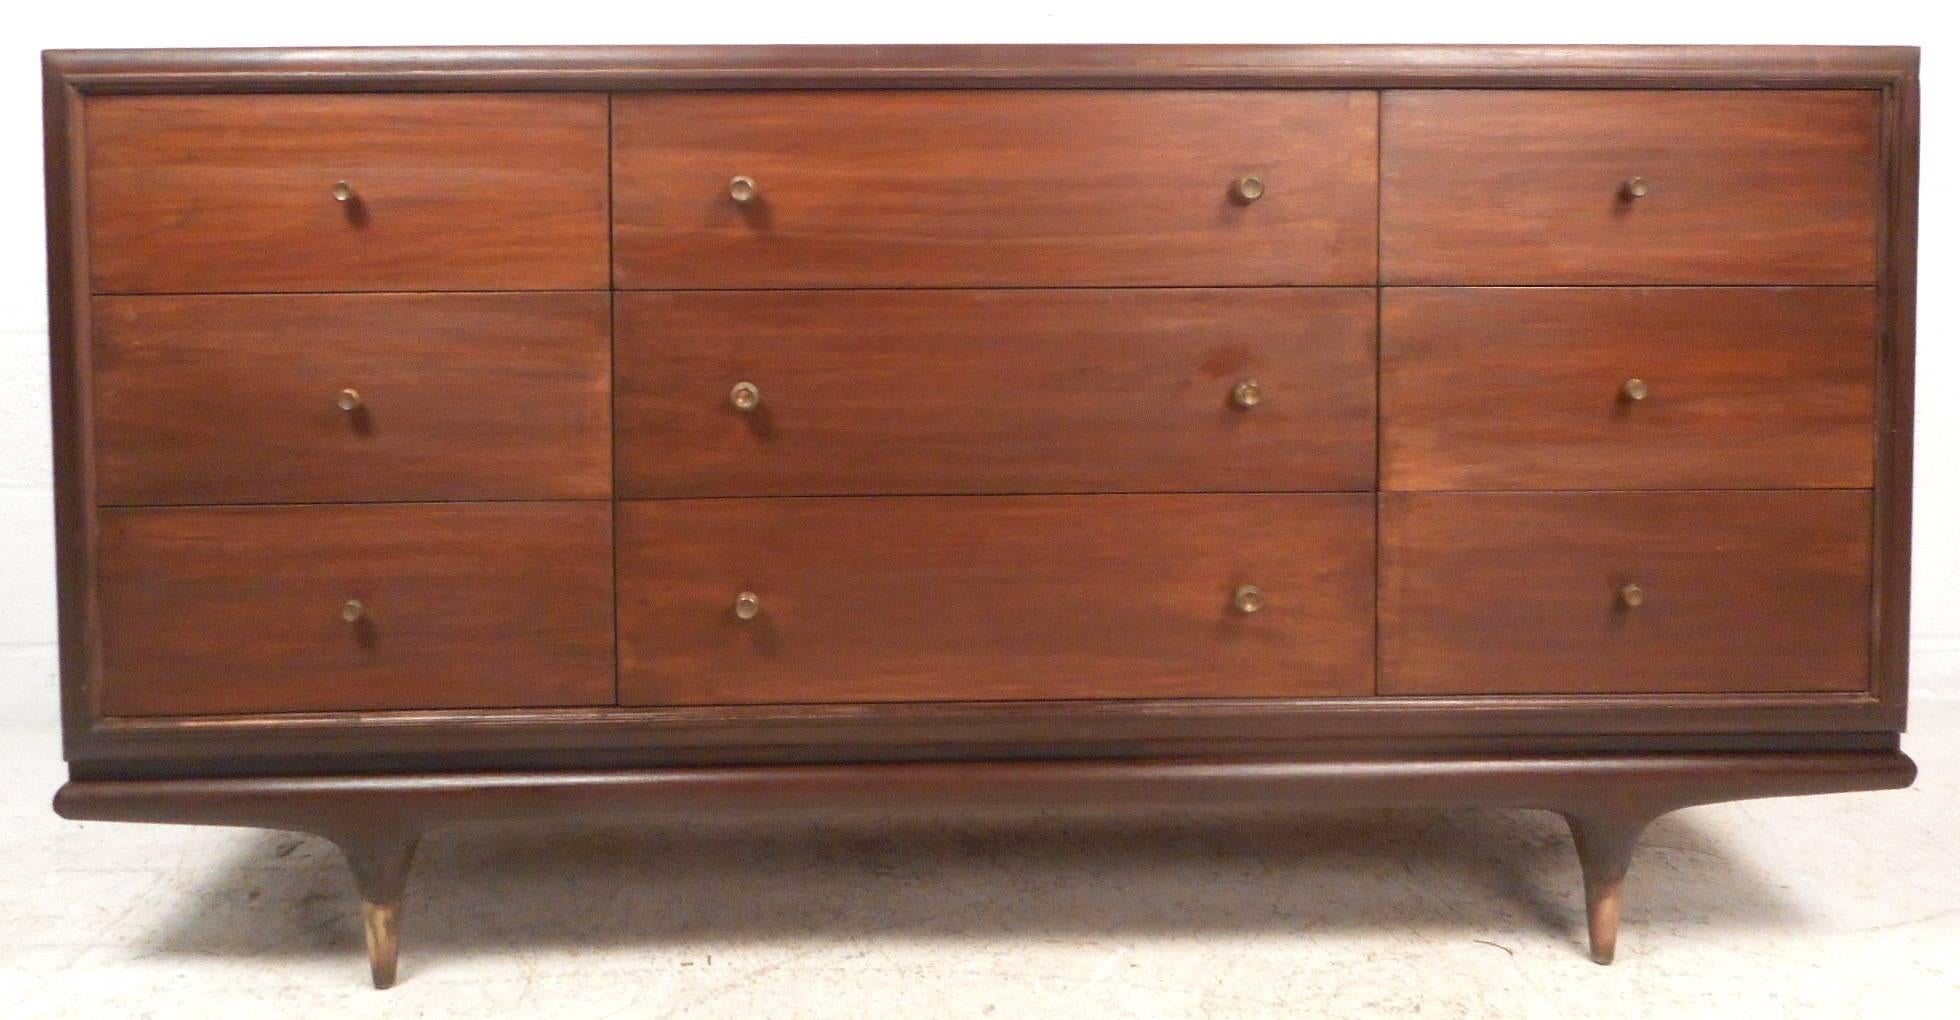 This gorgeous vintage modern bedroom set features a highboy dresser with five large drawers and a low dresser with nine drawers. Sleek design offers ample room for storage without sacrificing style. Unique round brass pulls on each drawer and